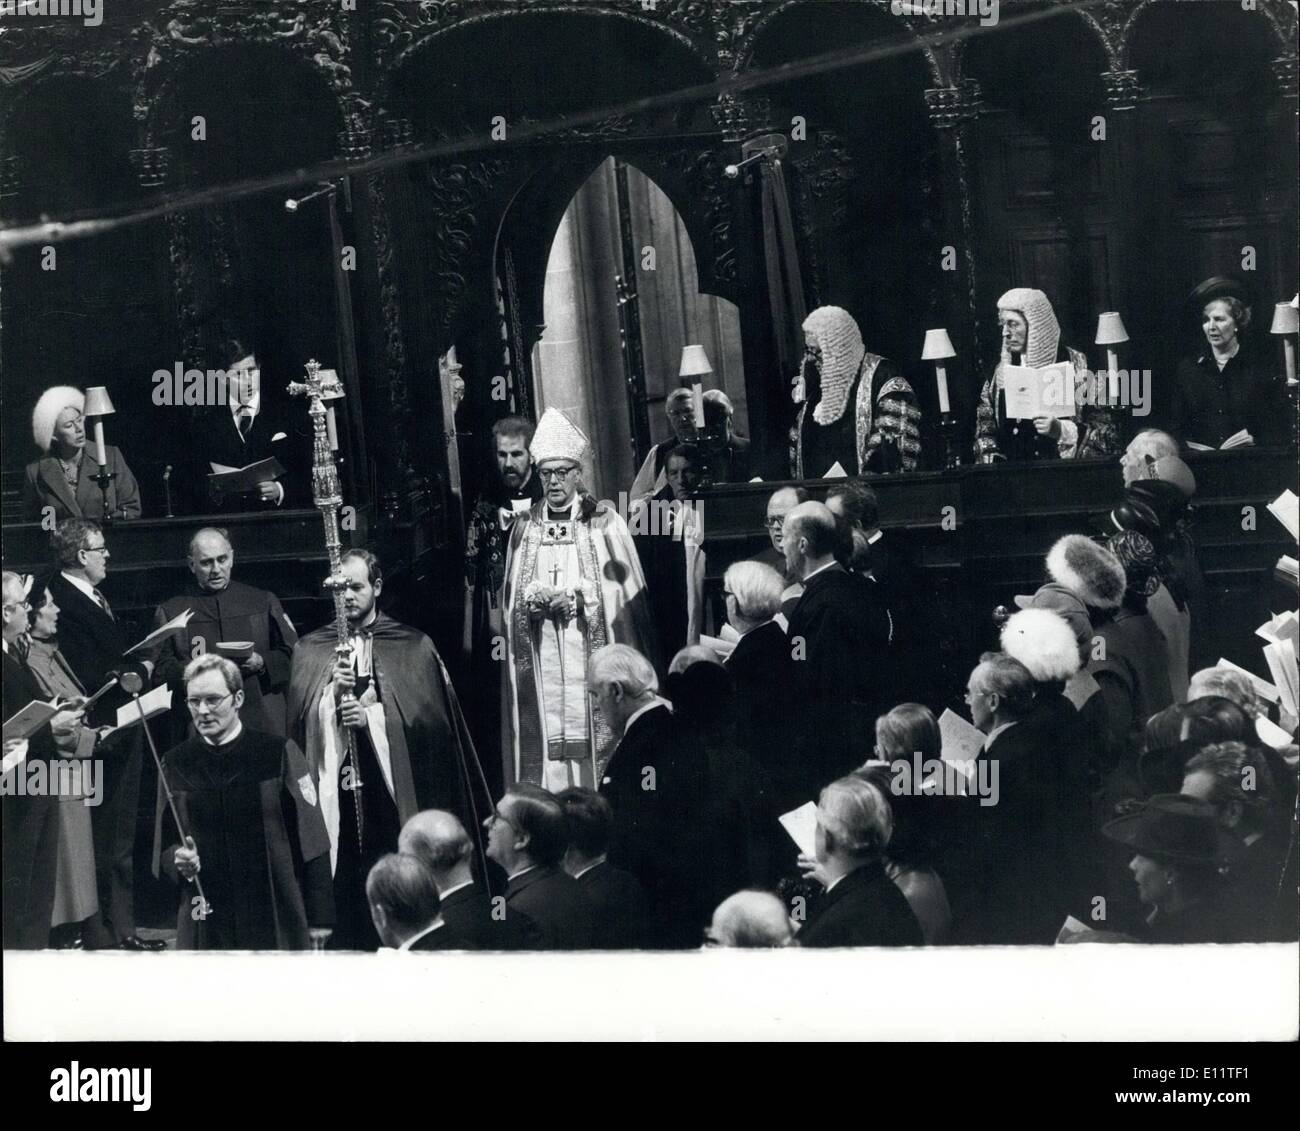 Mar. 03, 1980 - Archbishop Runcie enthroned in ancient splendour at Canterbury Cathedral; The 102nd Archbishop of Canterbury Robert Runcie, wlaks in procession in Canterbury Cathedral, watched by Prince Charles and Princess Margaret, Lord Hailsham, lord chancellor, the speaker of the House of Commons, Rt Hon George Thomas, and next to him is the Prime Minister Mrs Margaret Hatcher during the enthronement ceremony. Stock Photo